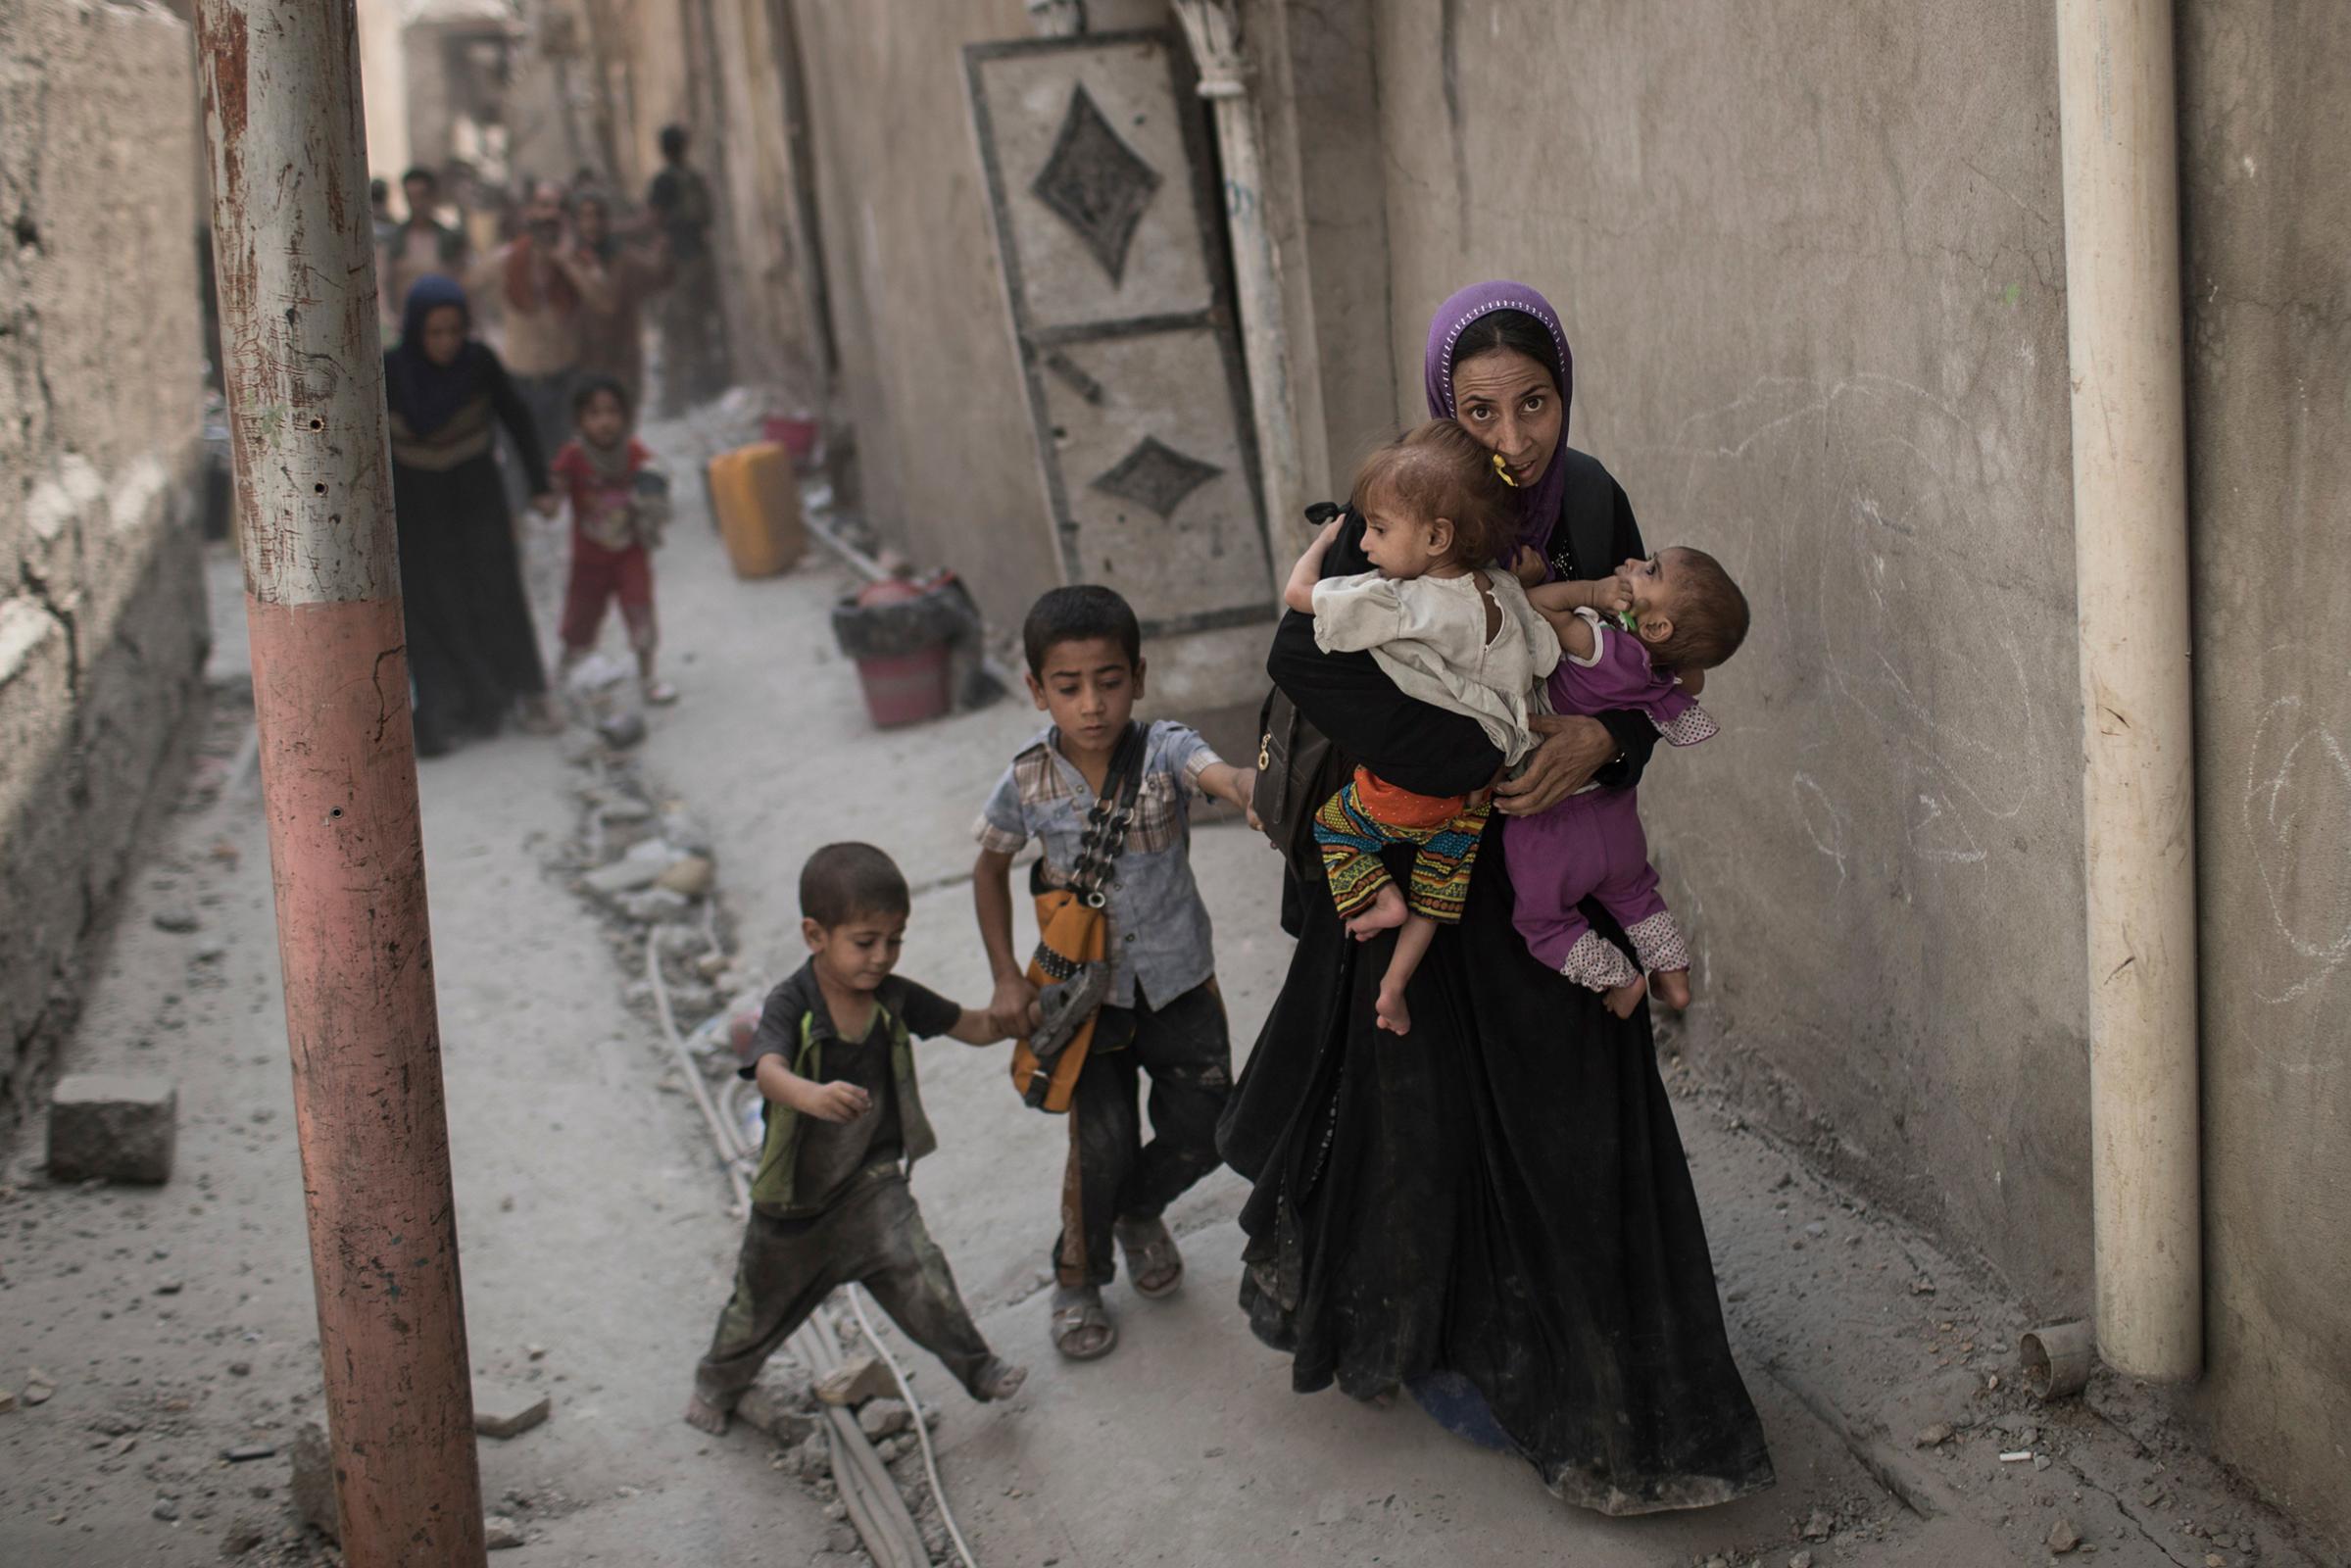 Iraqi civilians flee through an alley as Iraqi Special Forces continue their advance against Islamic State militants in the Old City of Mosul, Iraq, on July 3, 2017.